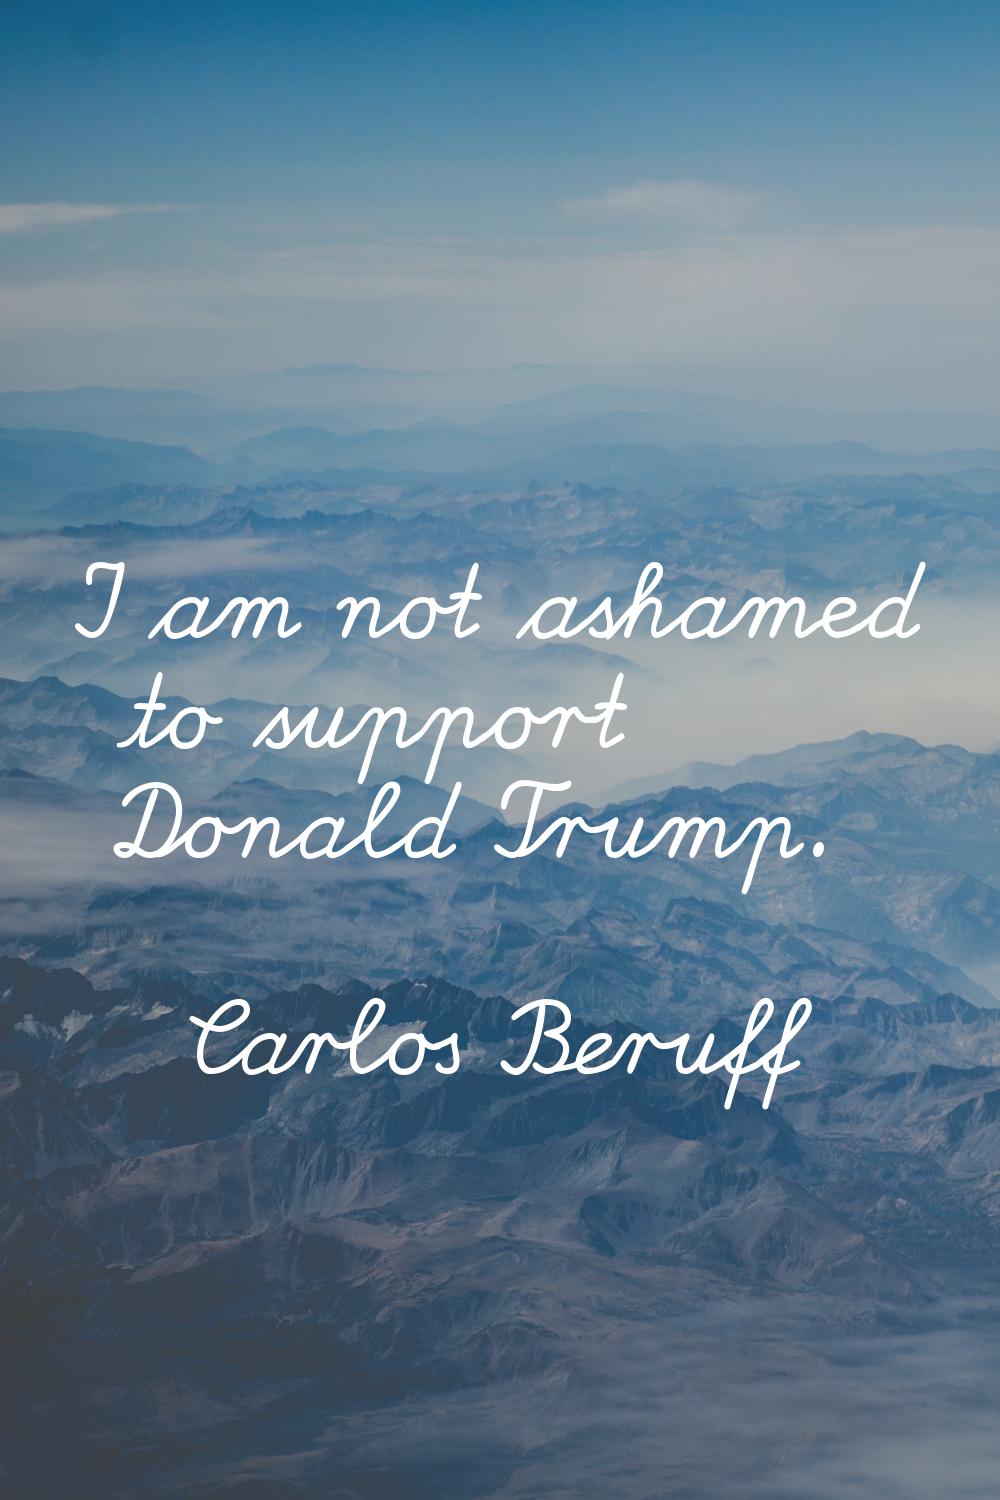 I am not ashamed to support Donald Trump.